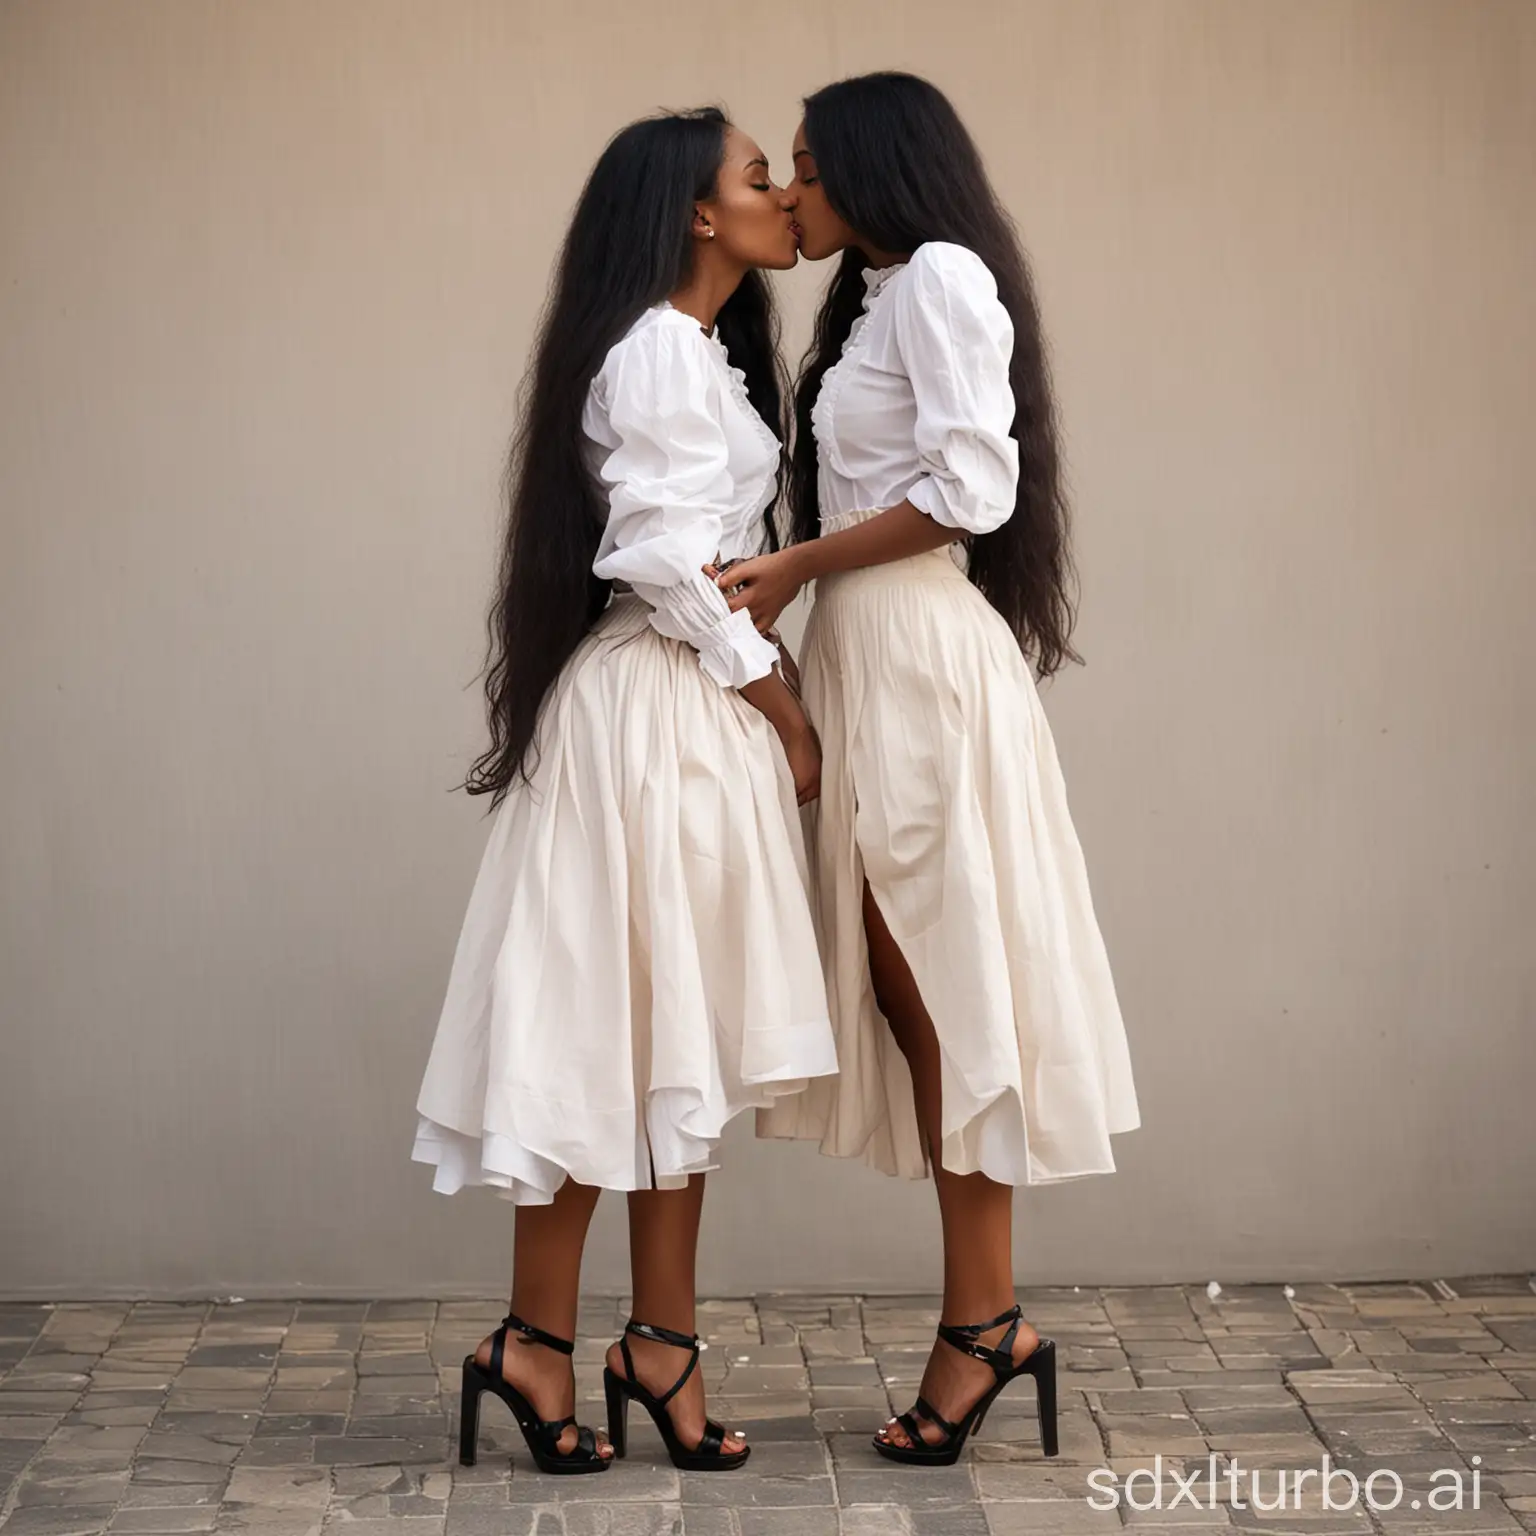 two black woman long hair wears tigth blouse , wears tigth long skirt , wears extreme hig heels plataform sandals , they kiss